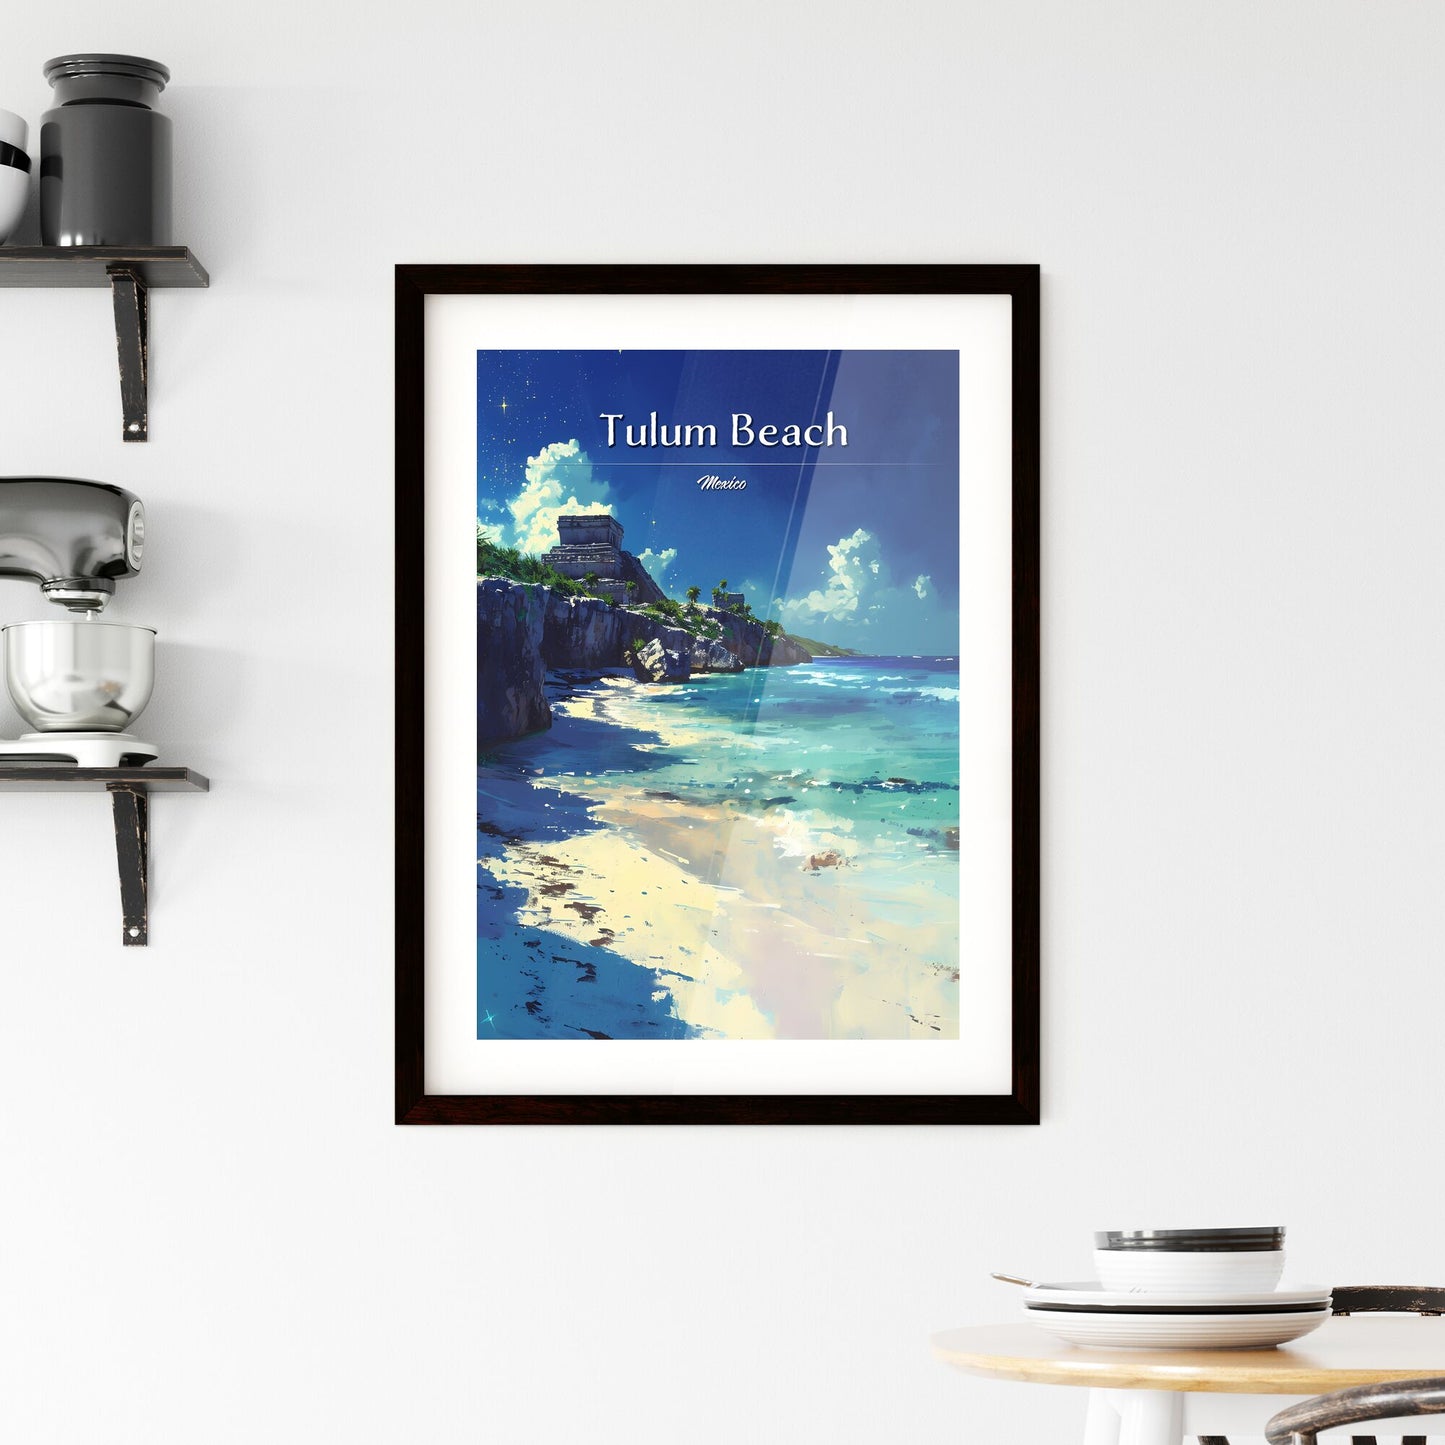 Tulum Beach, Mexico - Art print of a beach with rocks and water Default Title